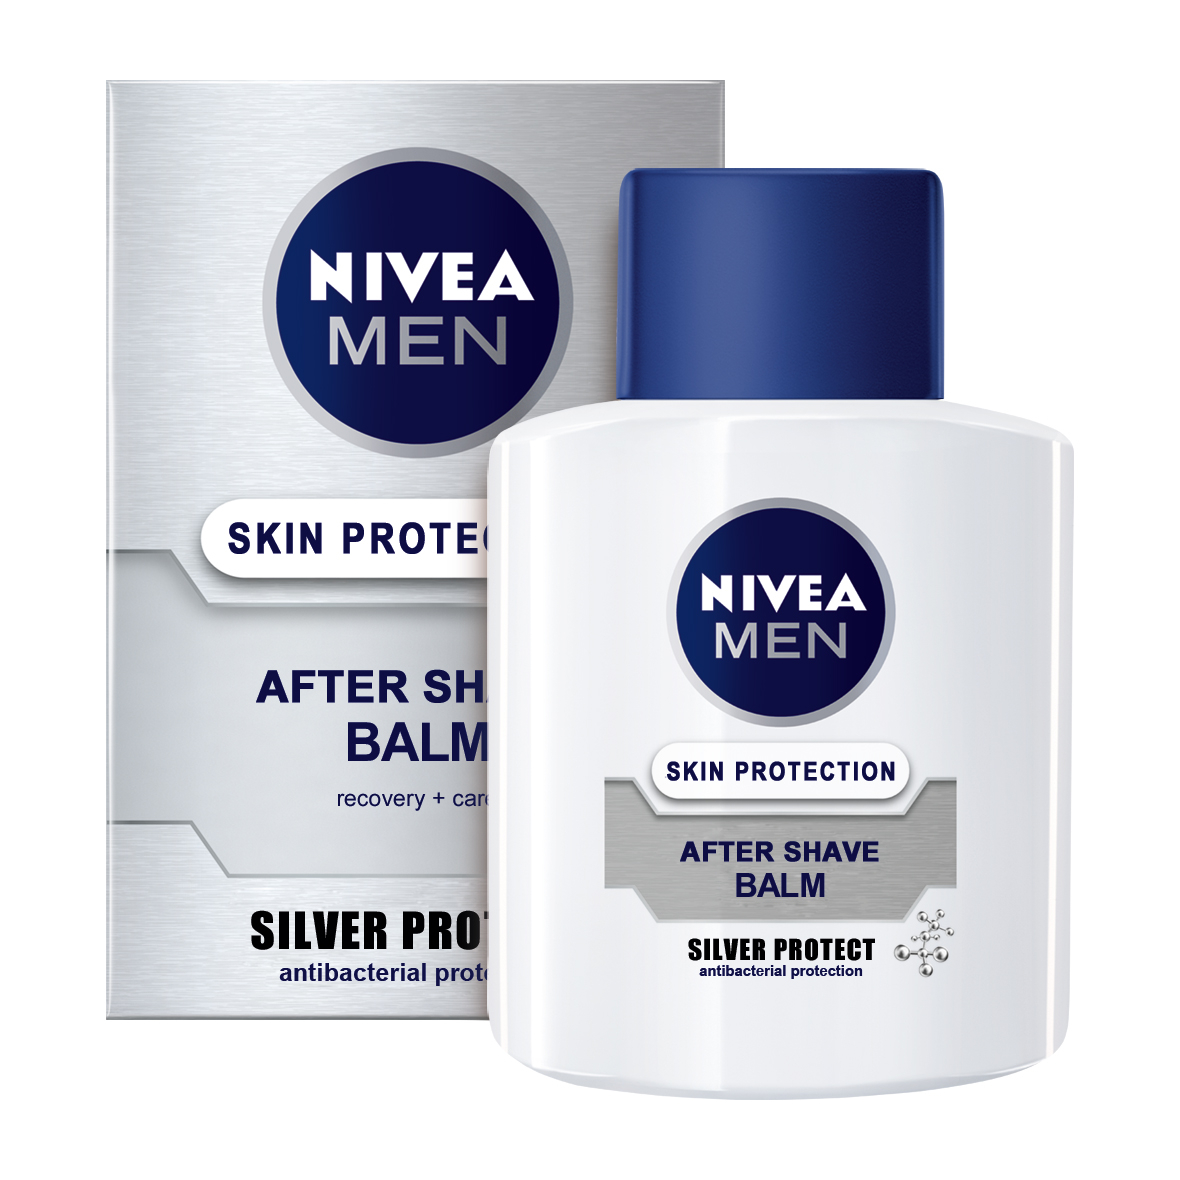 After shave - NIVEA AFTER SHAVE BALM SKIN PROTECTION 100ML 12/BAX, lucidiusmarket.ro